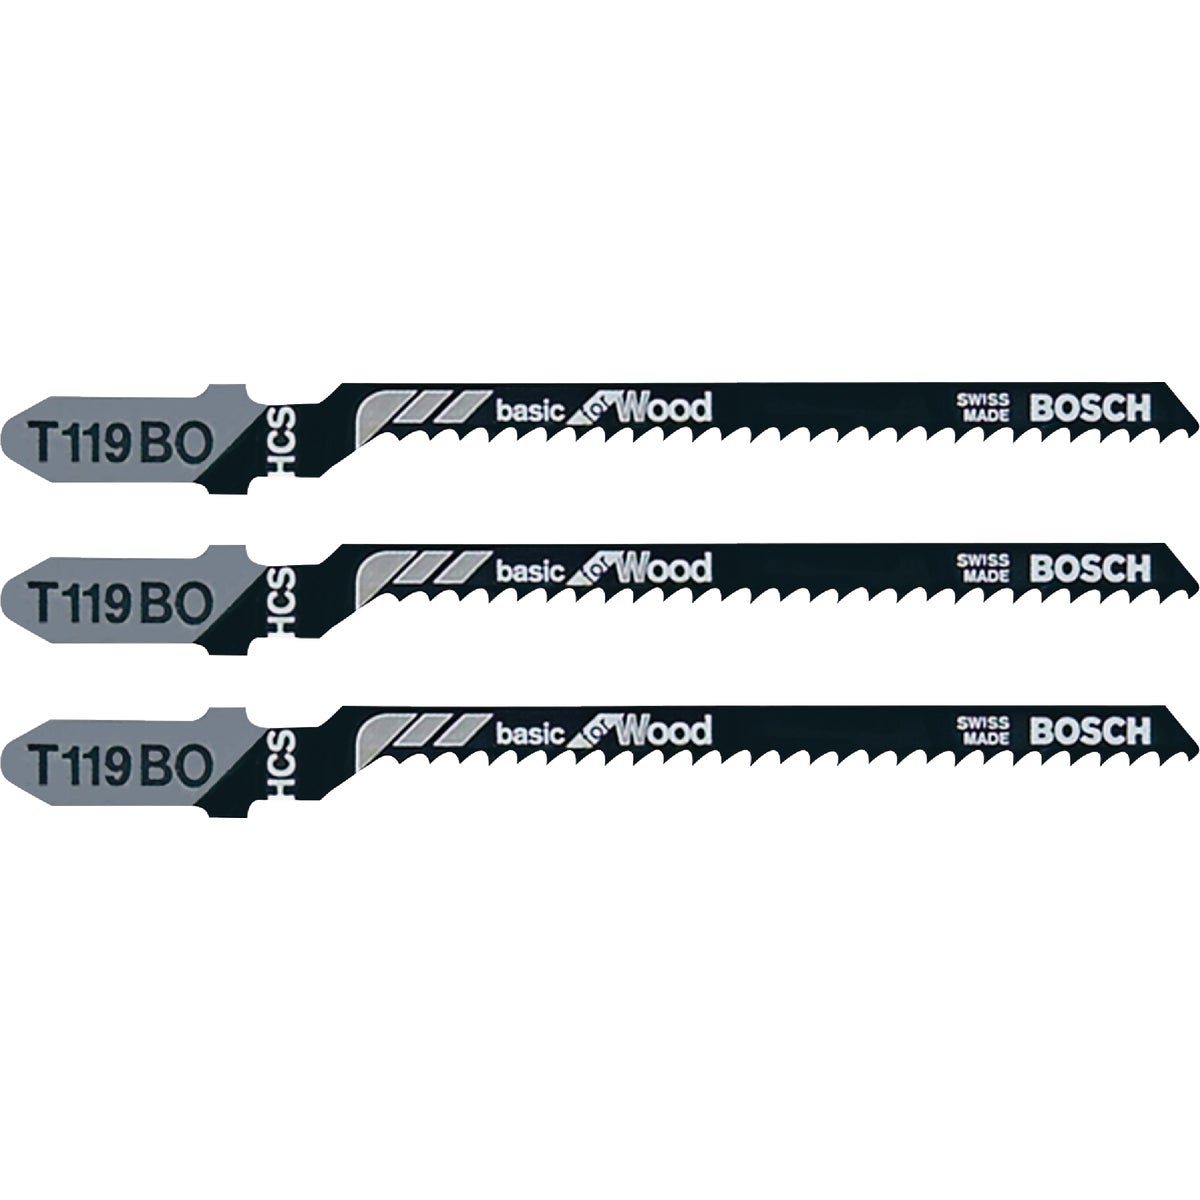 Bosch T-Shank 3 In. x 12 TPI High Carbon Steel Jig Saw Blade, Basic for Wood (5-Pack)